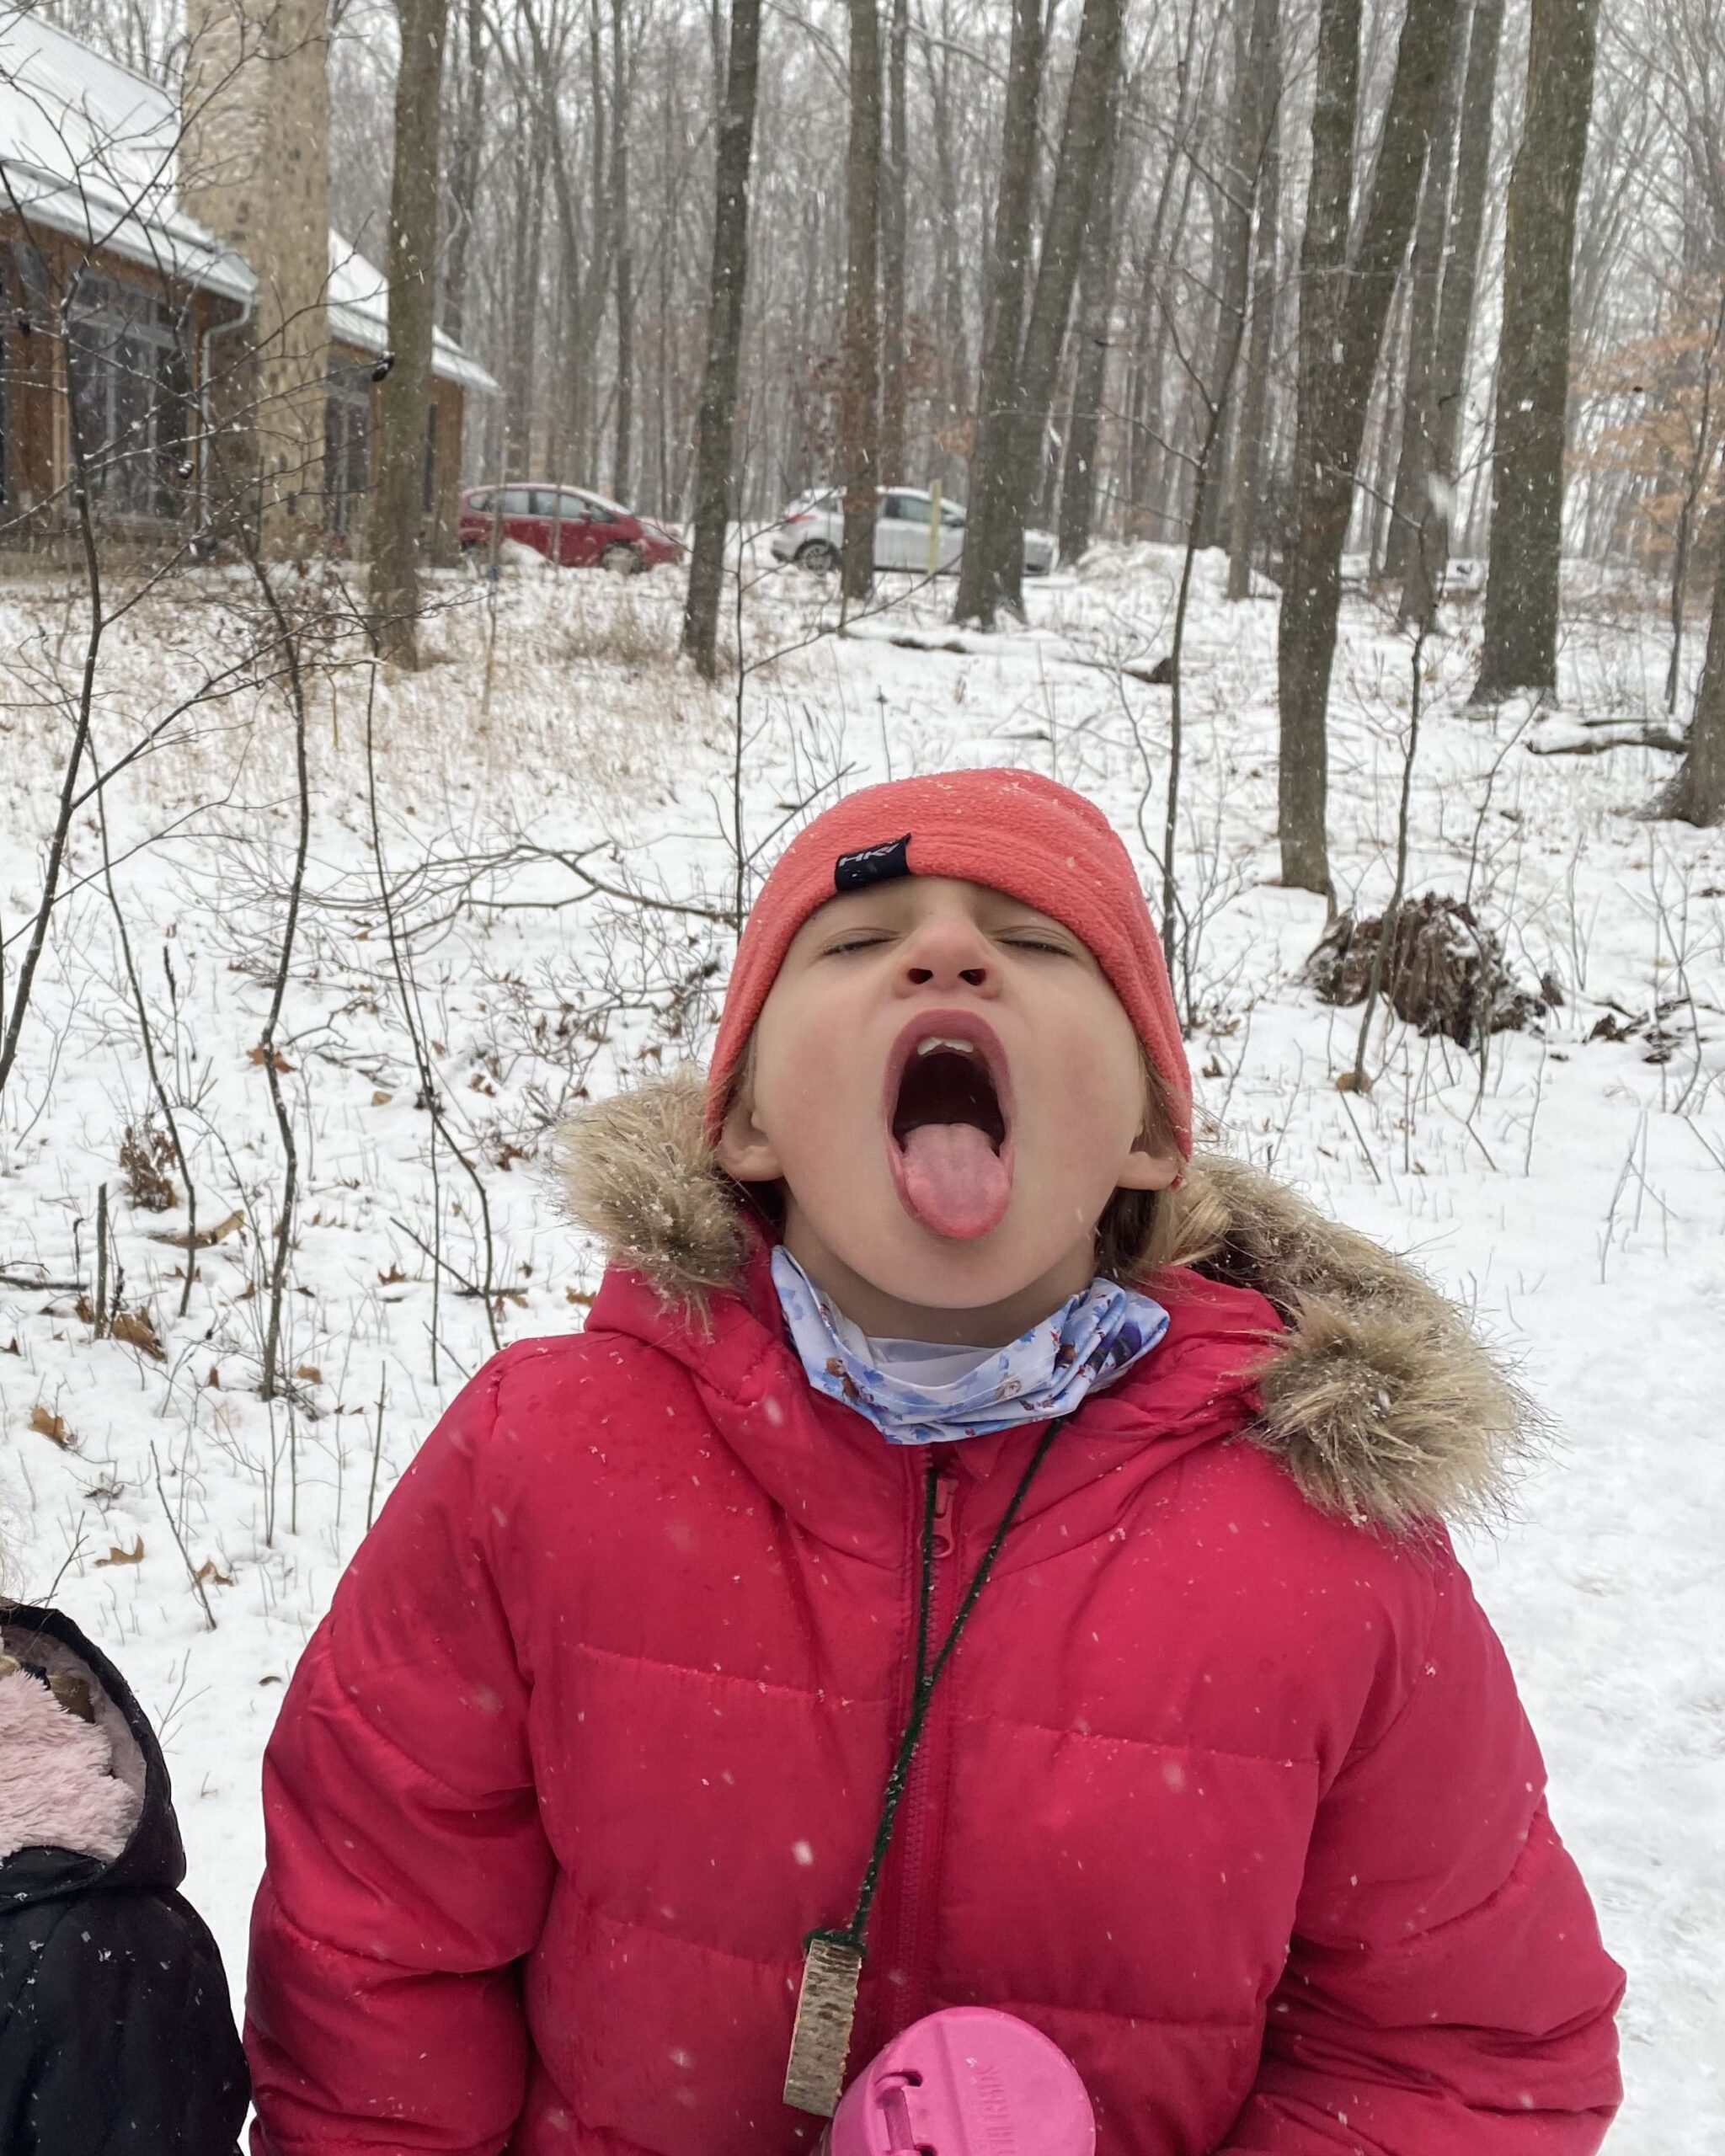 a young girls stands outside the Riveredge Sugarbush House catching snowflakes in her mouth